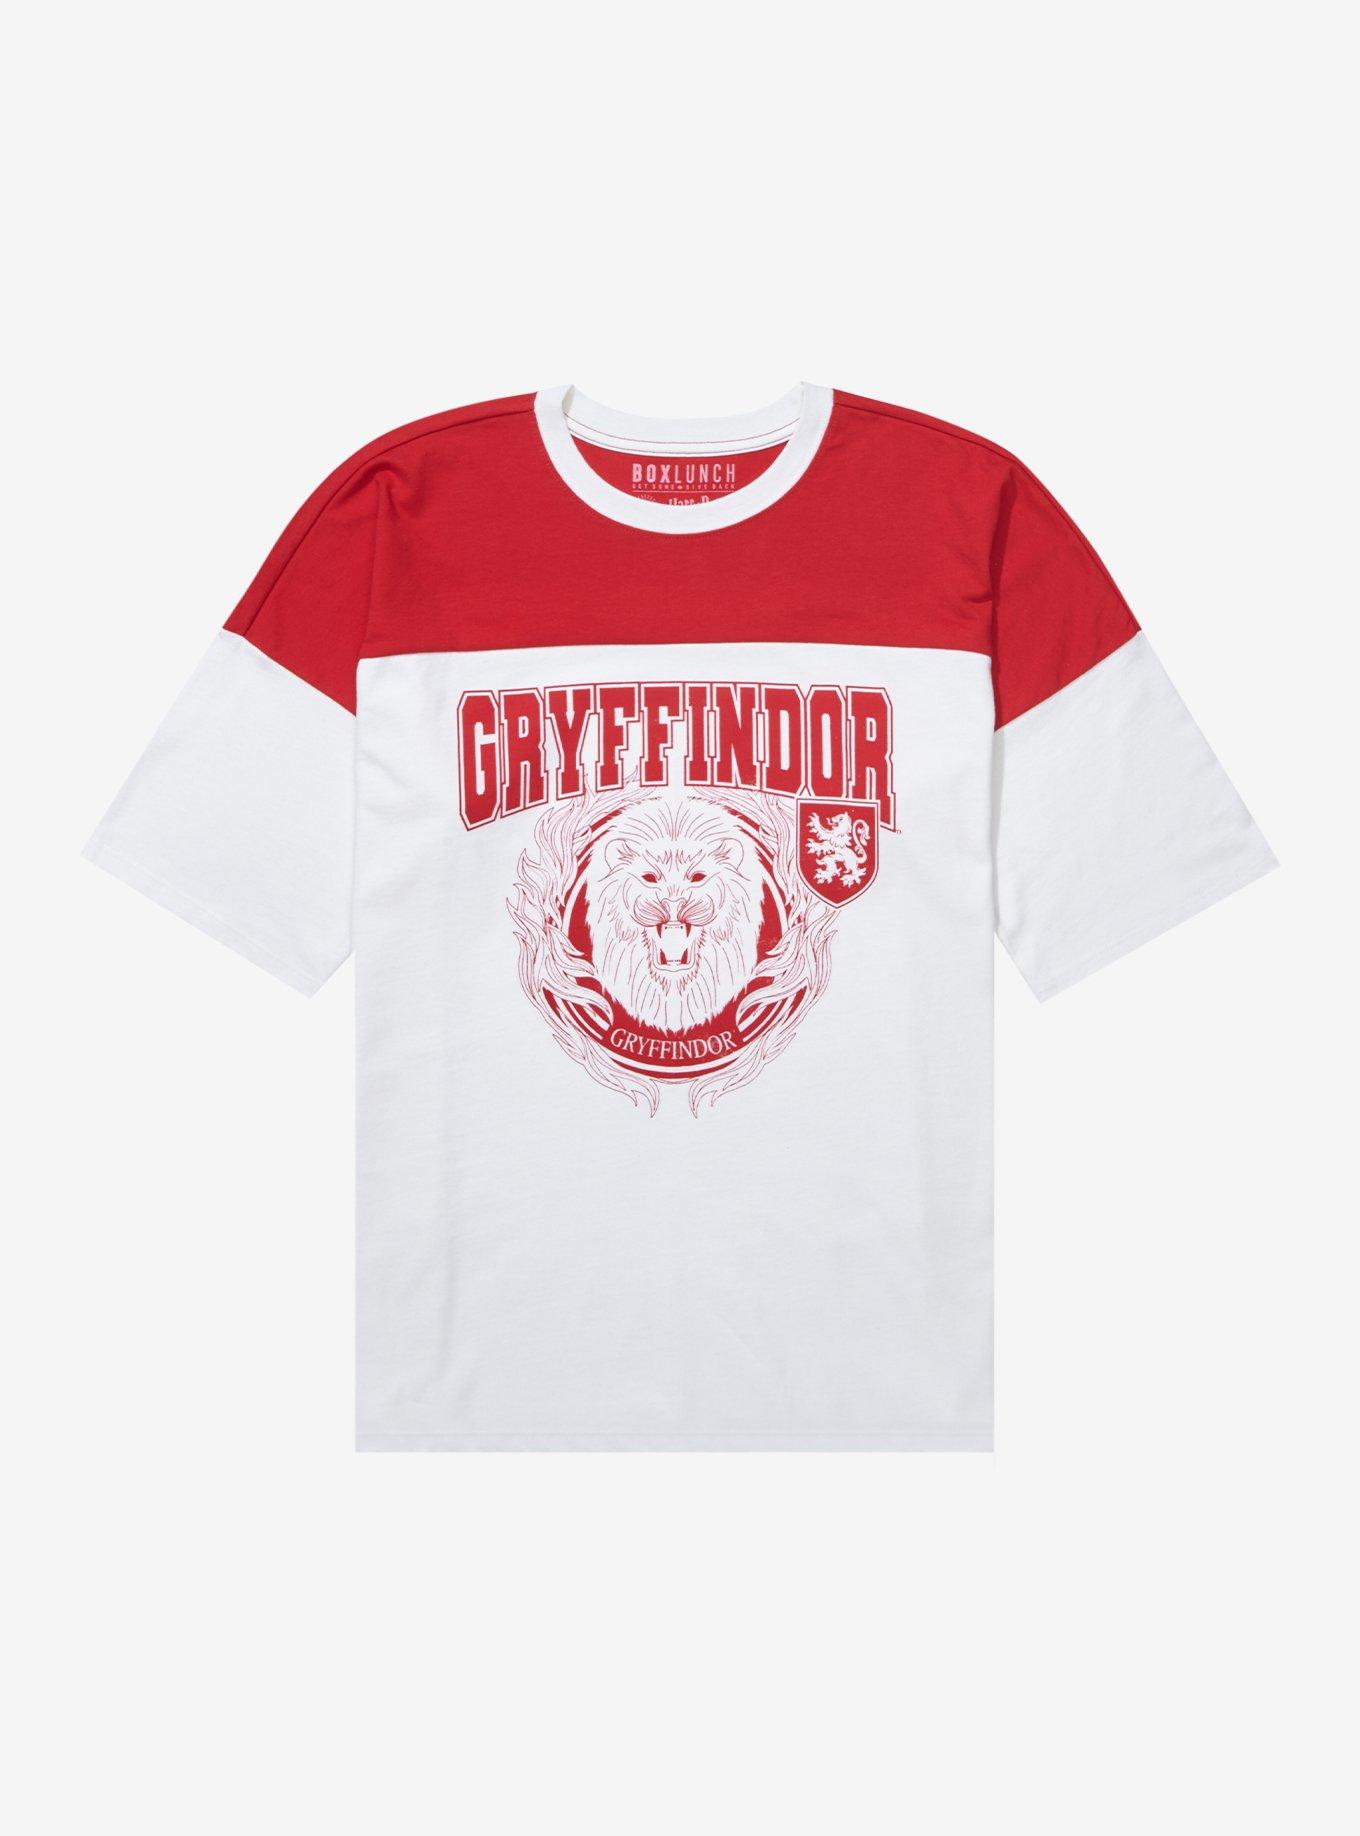 Potter Gryffindor Shirt Womens Gifts for Harry Potter Lovers